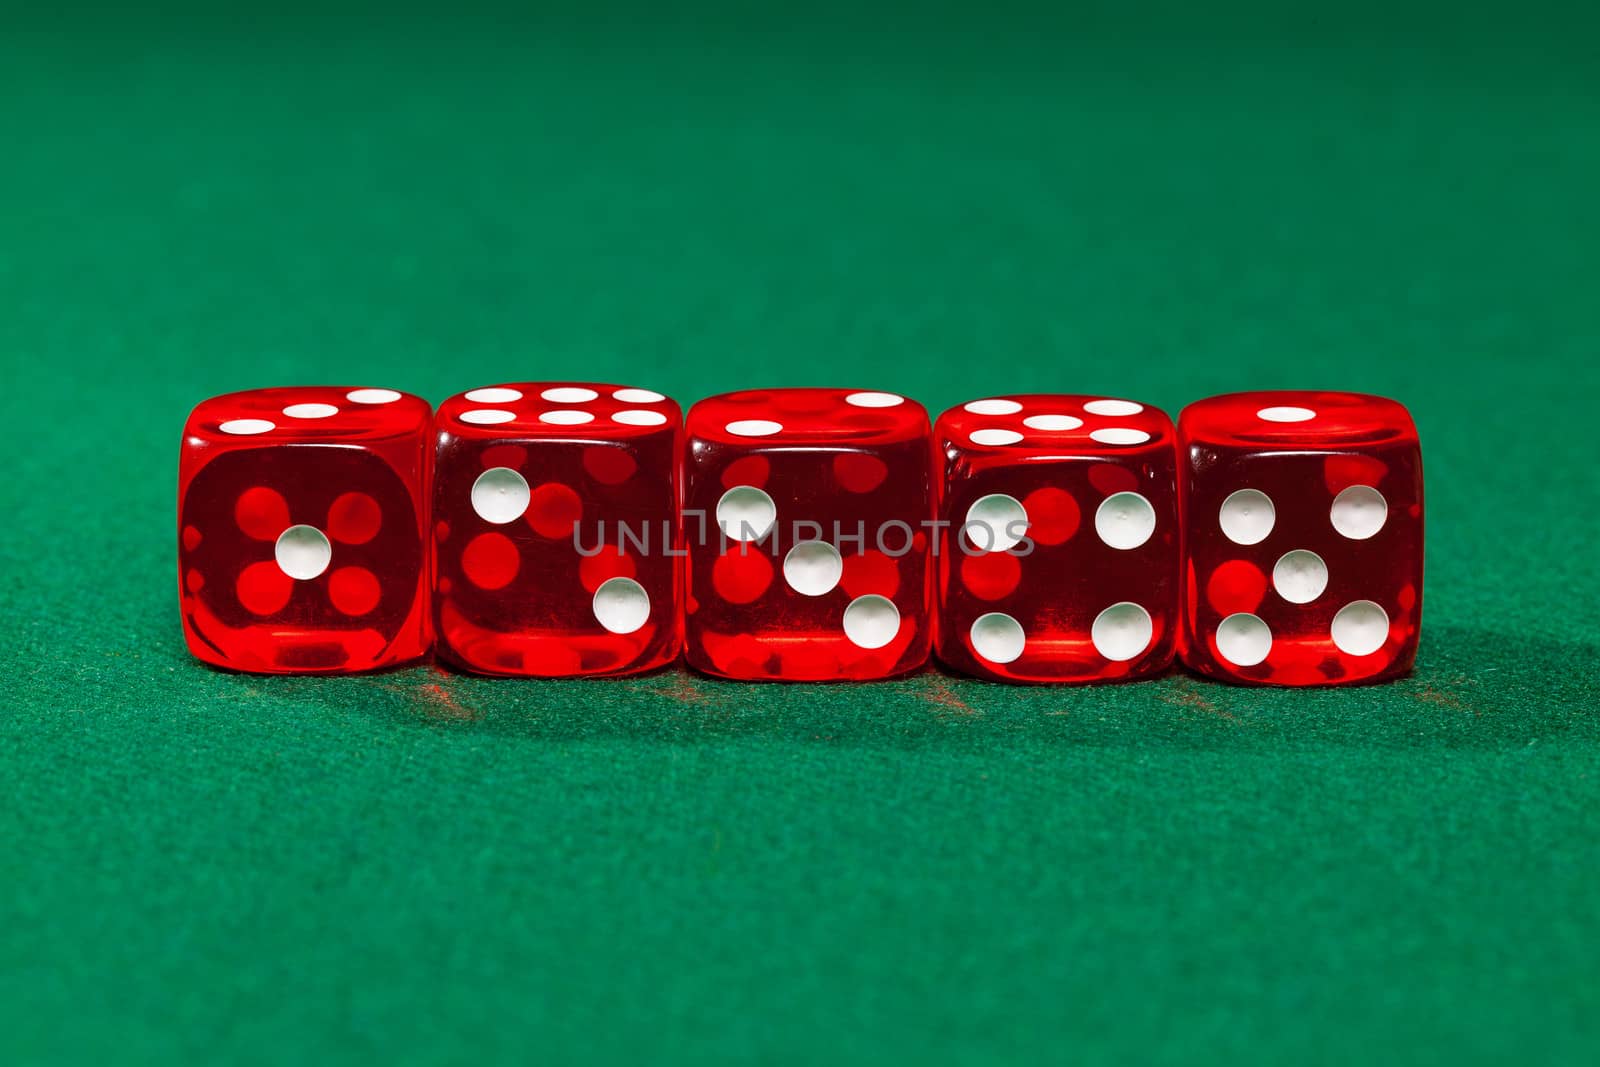 Red dice by Discovod